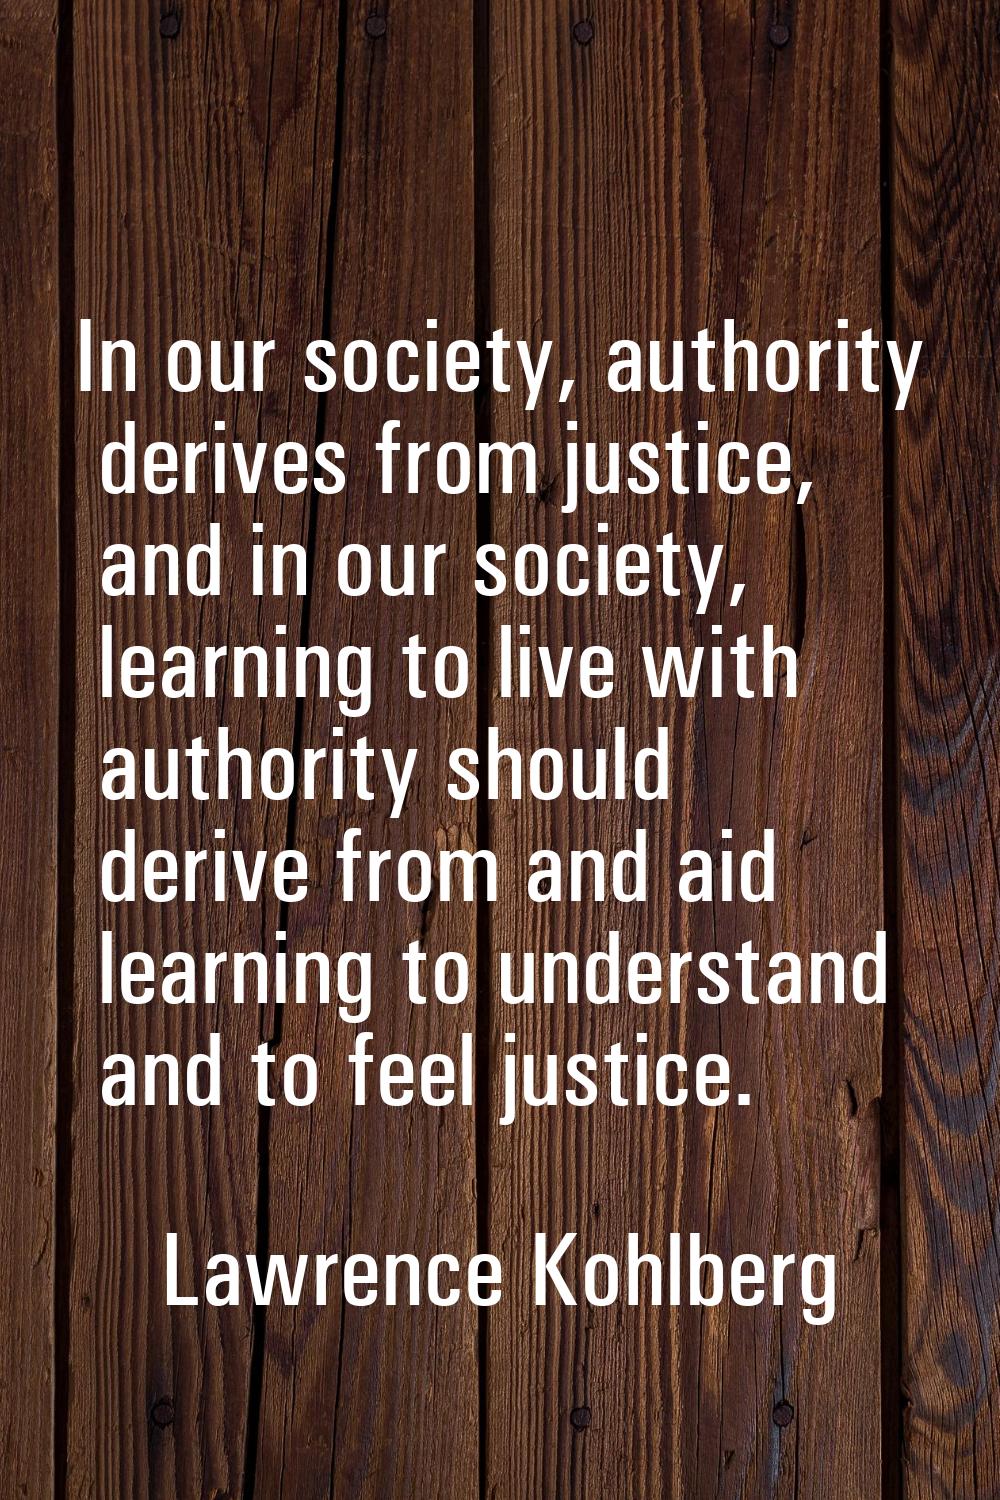 In our society, authority derives from justice, and in our society, learning to live with authority